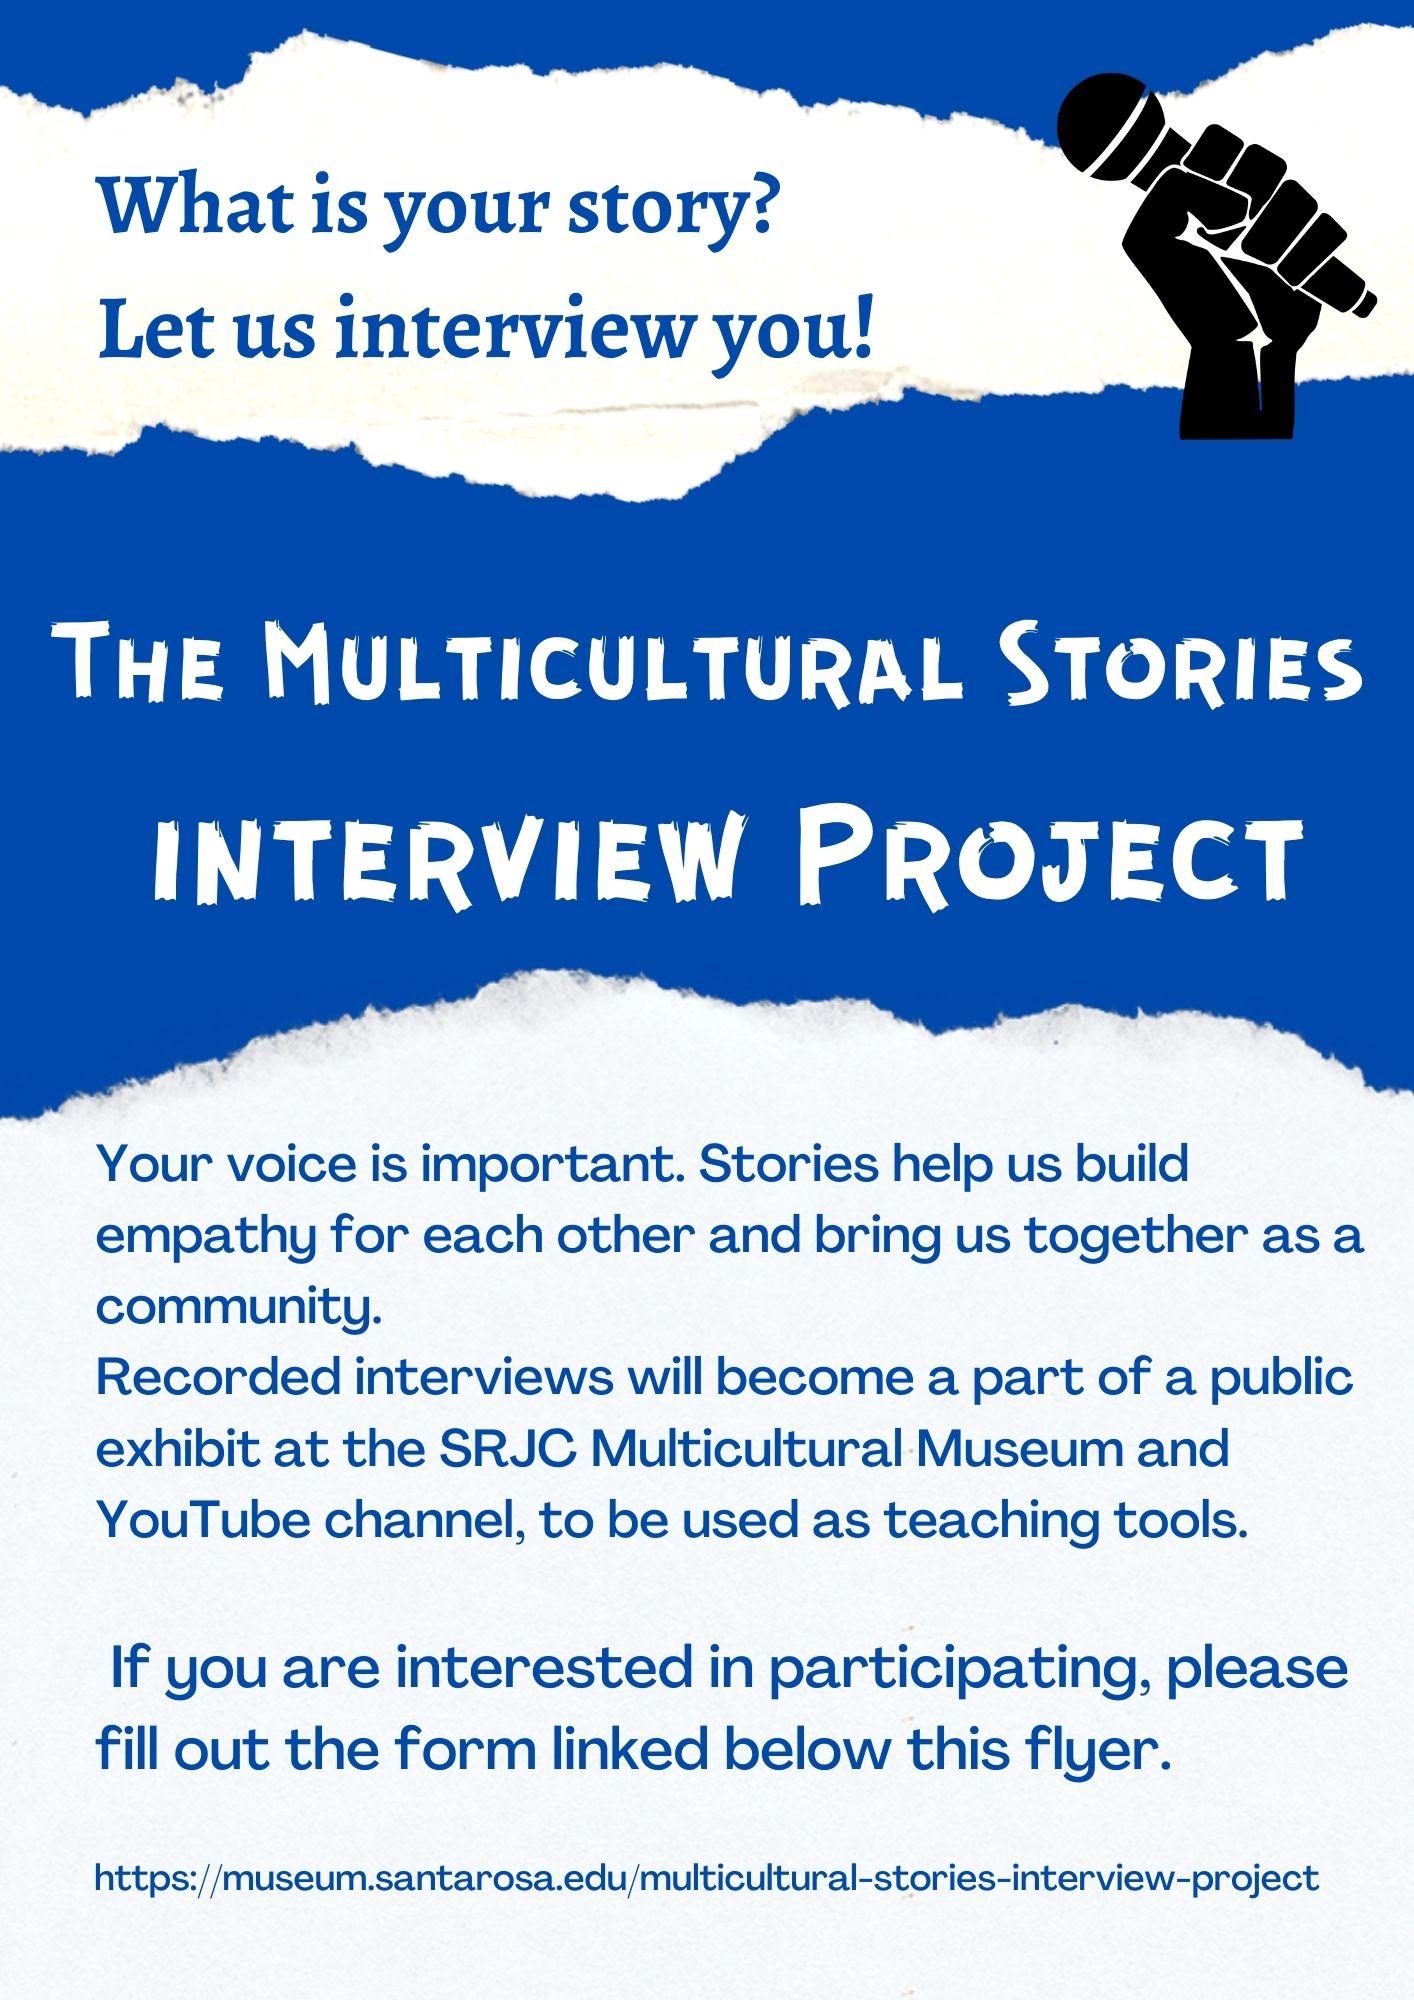 What is your story? Let us interview you! The Multicultural Stories Interview Project. Recorded interviews will become part of a public exhibit at the SRJC Multicultural Museum and YouTube channel, to be used as teaching tools. If you are interested in participating, please fill out the form below. 